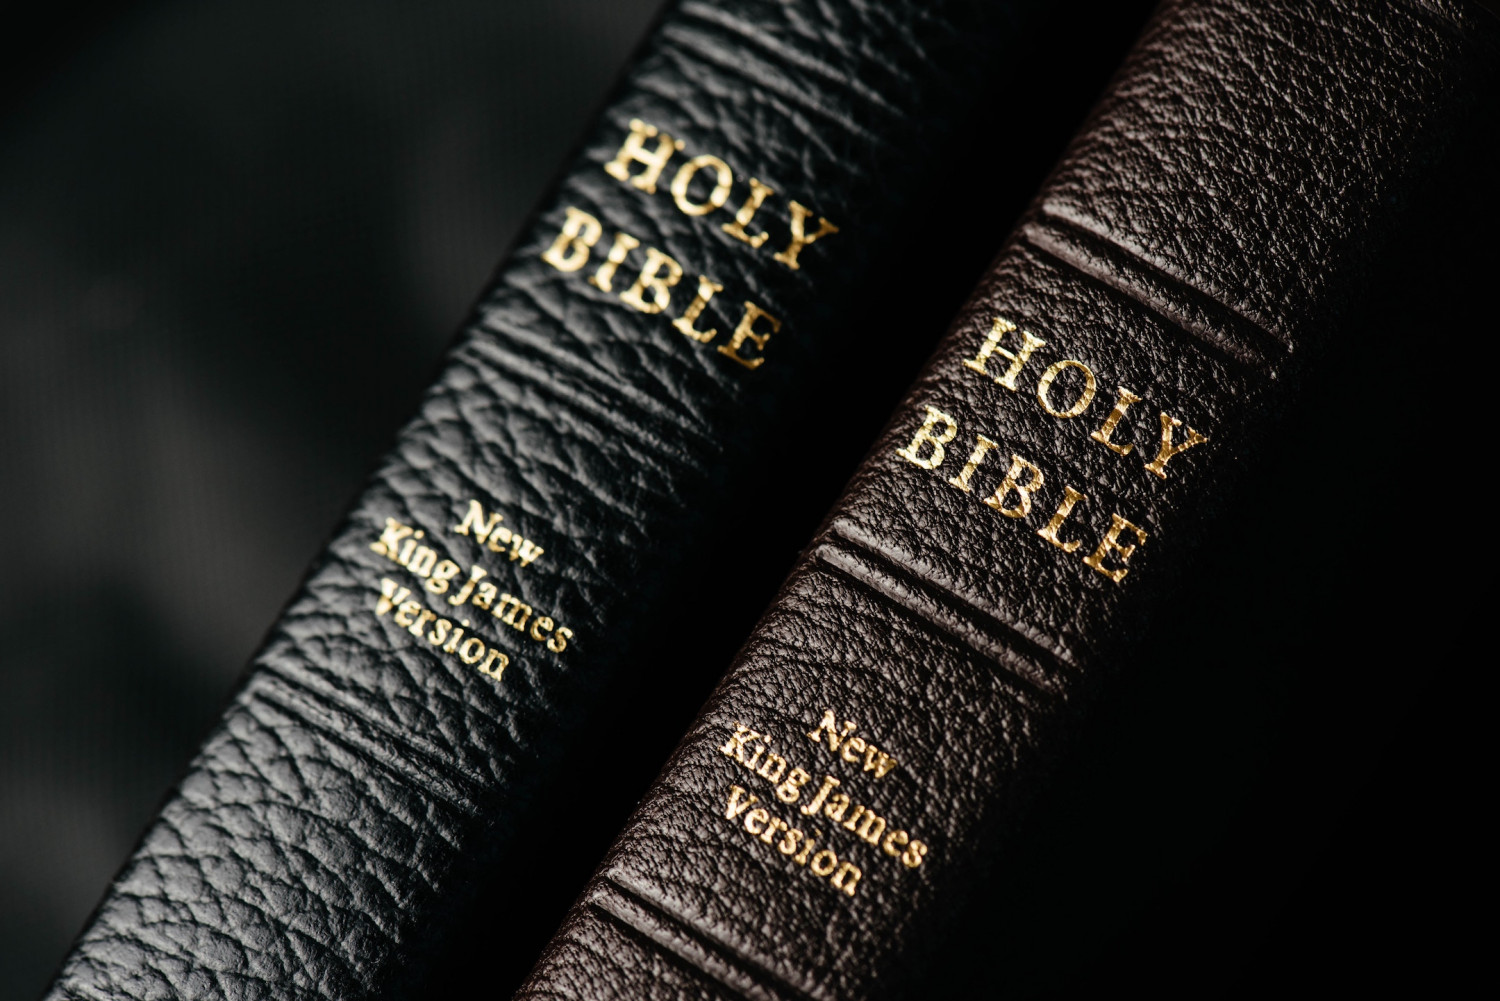 Feds Apologize After Veterans Affairs Removed Bible: ‘Will Not Be Bullied on This Issue’